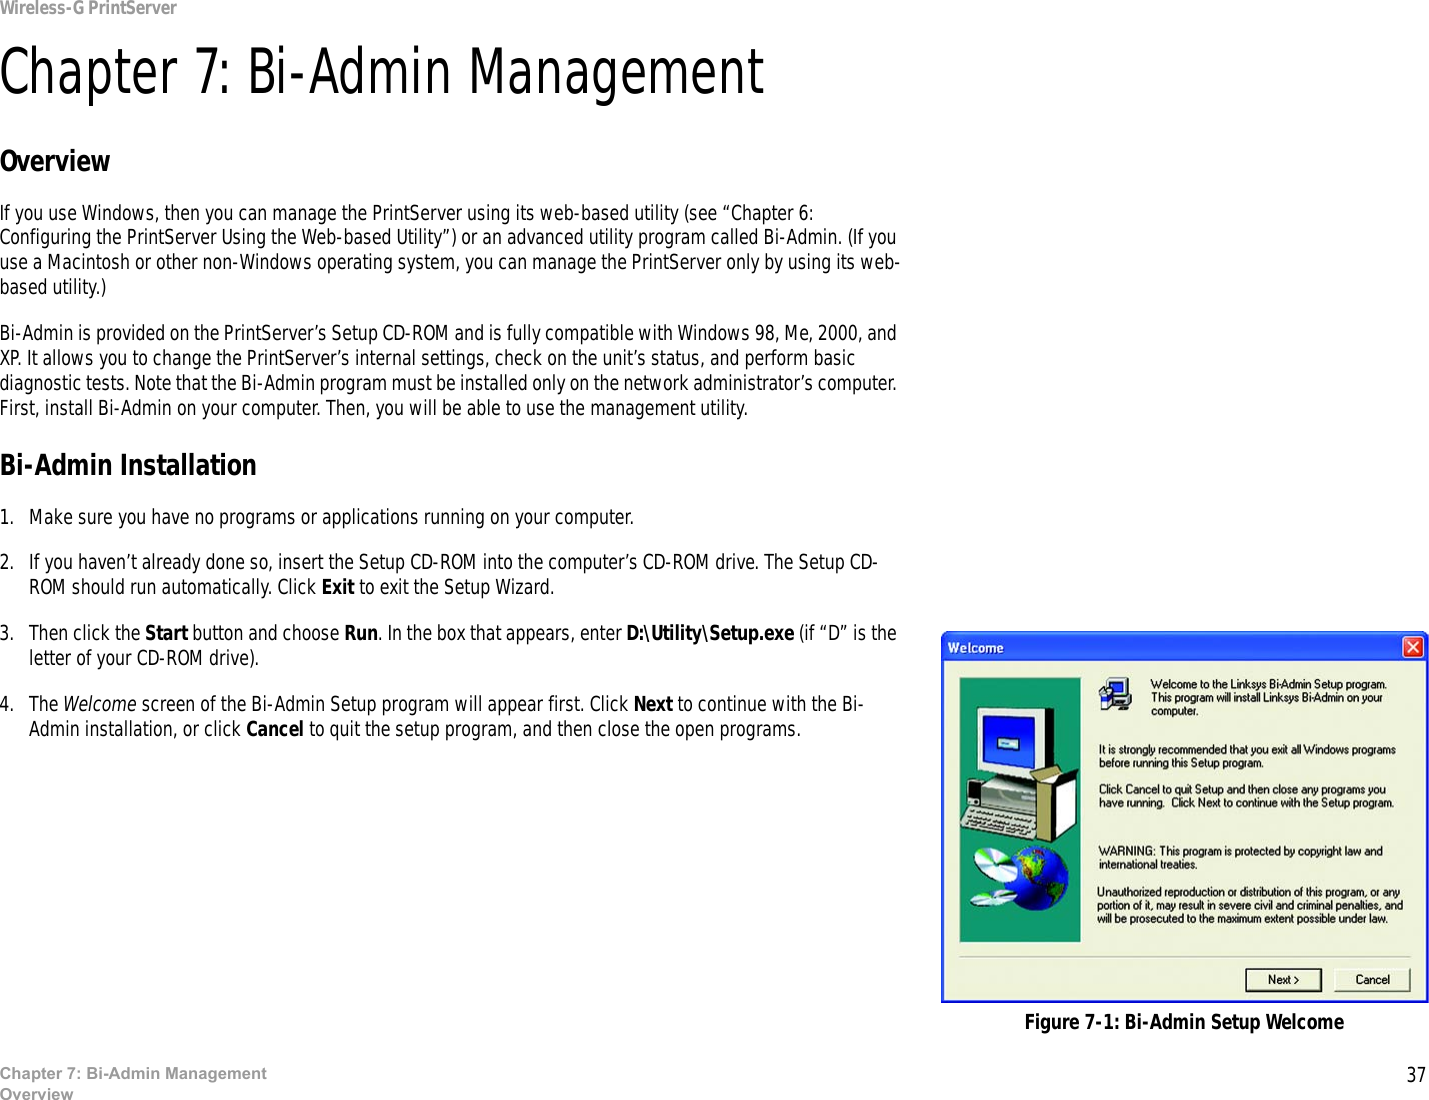 37Wireless-G PrintServerChapter 7: Bi-Admin ManagementOverviewChapter 7: Bi-Admin ManagementOverviewIf you use Windows, then you can manage the PrintServer using its web-based utility (see “Chapter 6: Configuring the PrintServer Using the Web-based Utility”) or an advanced utility program called Bi-Admin. (If you use a Macintosh or other non-Windows operating system, you can manage the PrintServer only by using its web-based utility.)Bi-Admin is provided on the PrintServer’s Setup CD-ROM and is fully compatible with Windows 98, Me, 2000, and XP. It allows you to change the PrintServer’s internal settings, check on the unit’s status, and perform basic diagnostic tests. Note that the Bi-Admin program must be installed only on the network administrator’s computer. First, install Bi-Admin on your computer. Then, you will be able to use the management utility.Bi-Admin Installation1. Make sure you have no programs or applications running on your computer.2. If you haven’t already done so, insert the Setup CD-ROM into the computer’s CD-ROM drive. The Setup CD-ROM should run automatically. Click Exit to exit the Setup Wizard.3. Then click the Start button and choose Run. In the box that appears, enter D:\Utility\Setup.exe (if “D” is the letter of your CD-ROM drive).4. The Welcome screen of the Bi-Admin Setup program will appear first. Click Next to continue with the Bi-Admin installation, or click Cancel to quit the setup program, and then close the open programs. Figure 7-1: Bi-Admin Setup Welcome